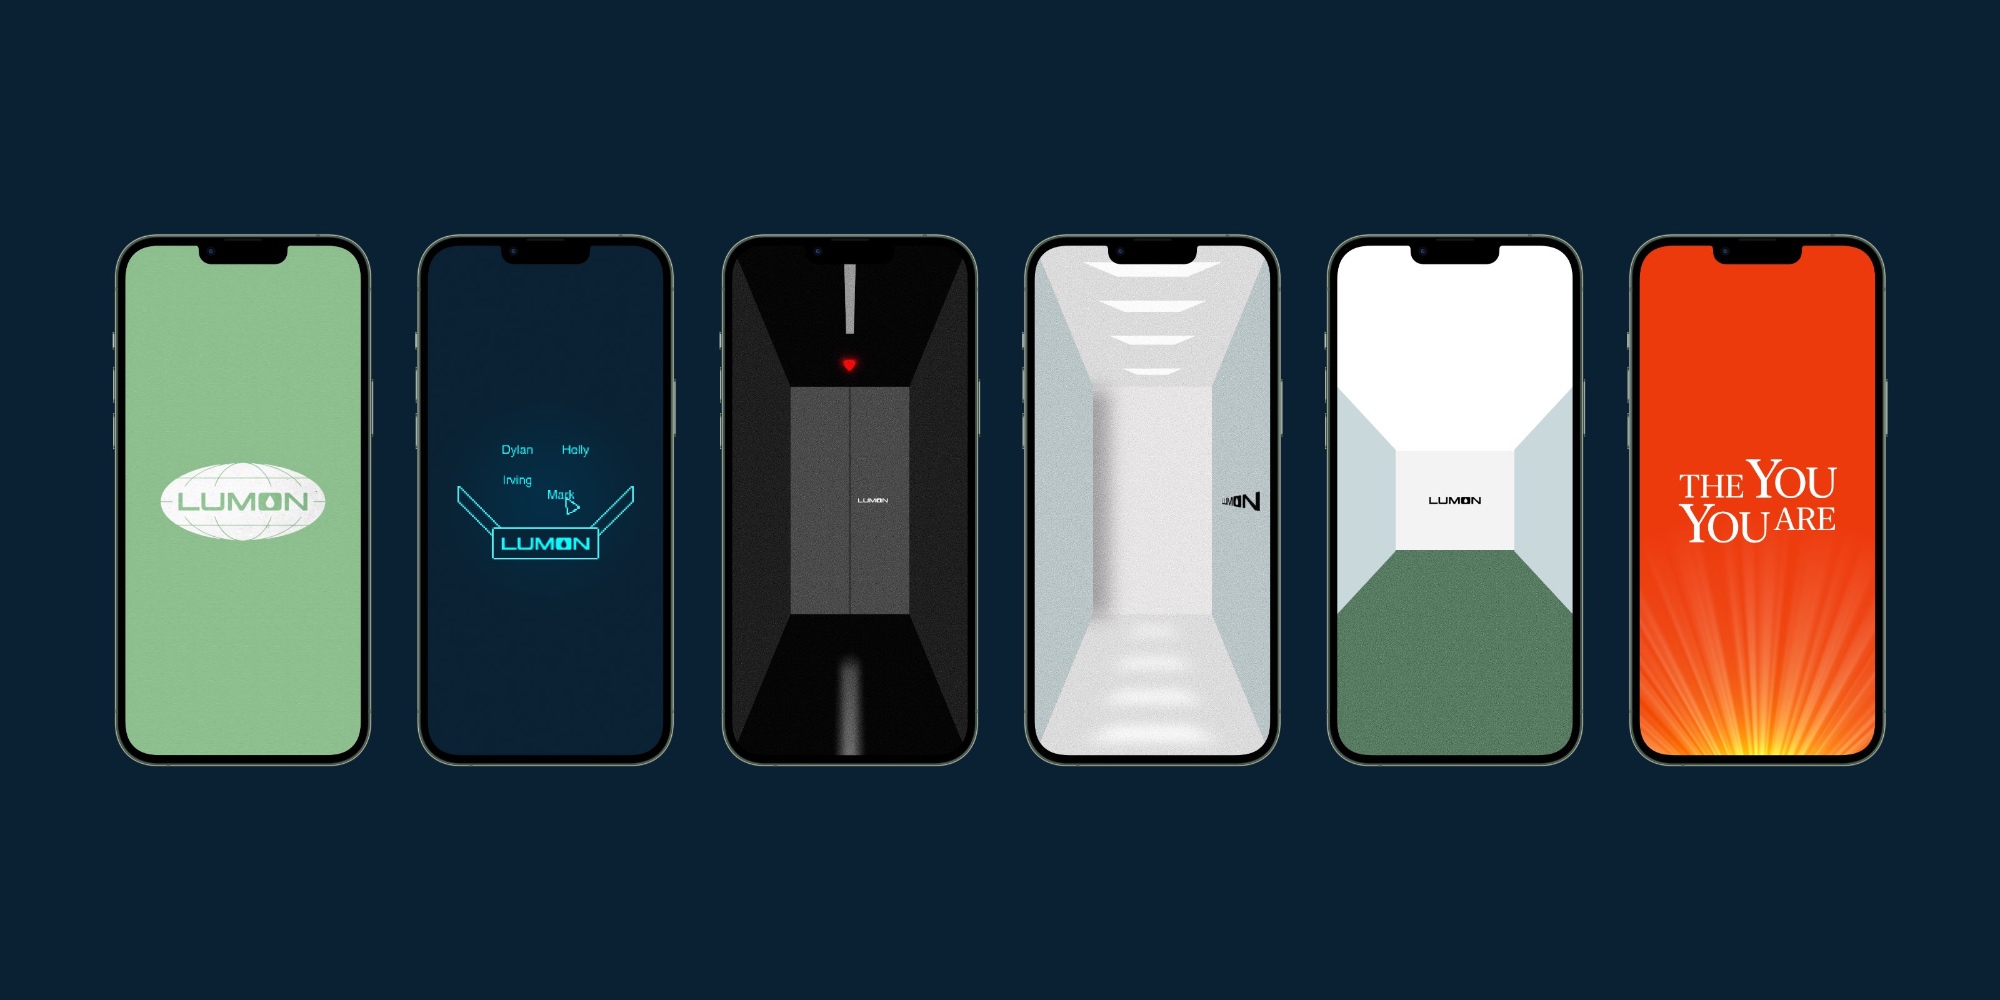 These Severance wallpapers for iPhone will make you feel like a Lumon  employee  9to5Mac